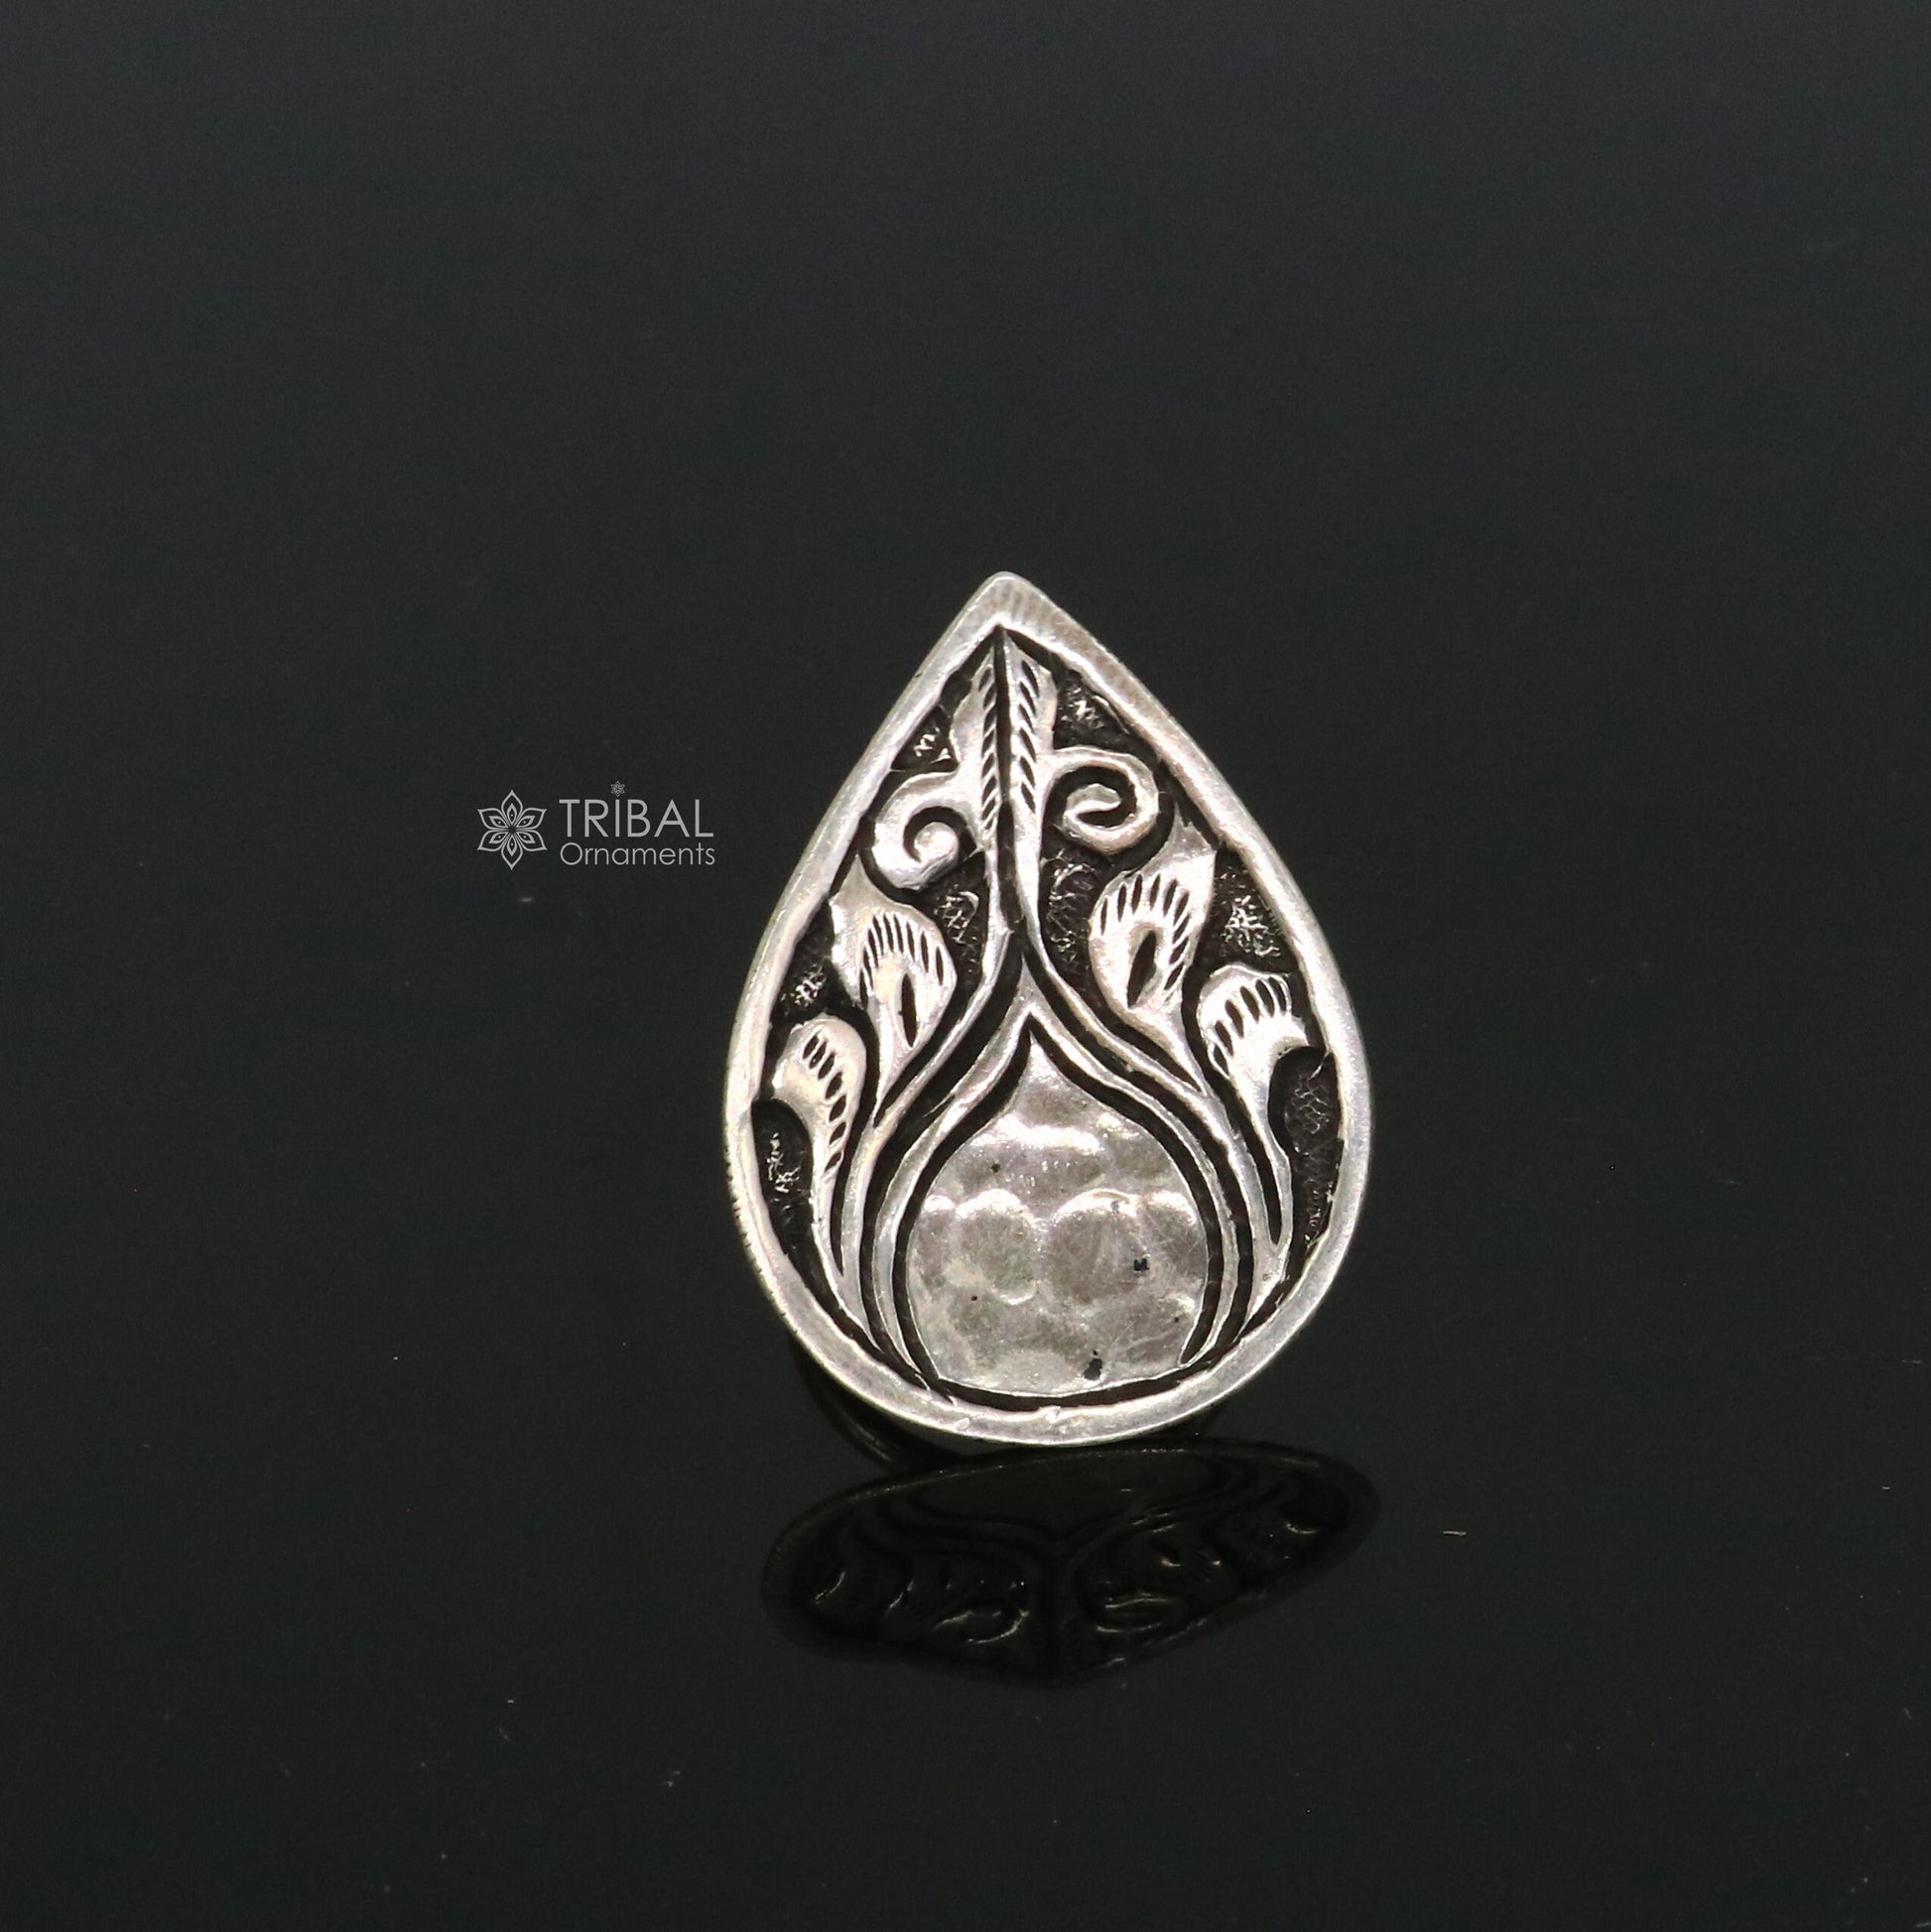 Indian Classical cultural flower design 925 sterling silver adjustable ring, best tribal ethnic jewelry Navratri jewelry sr389 - TRIBAL ORNAMENTS